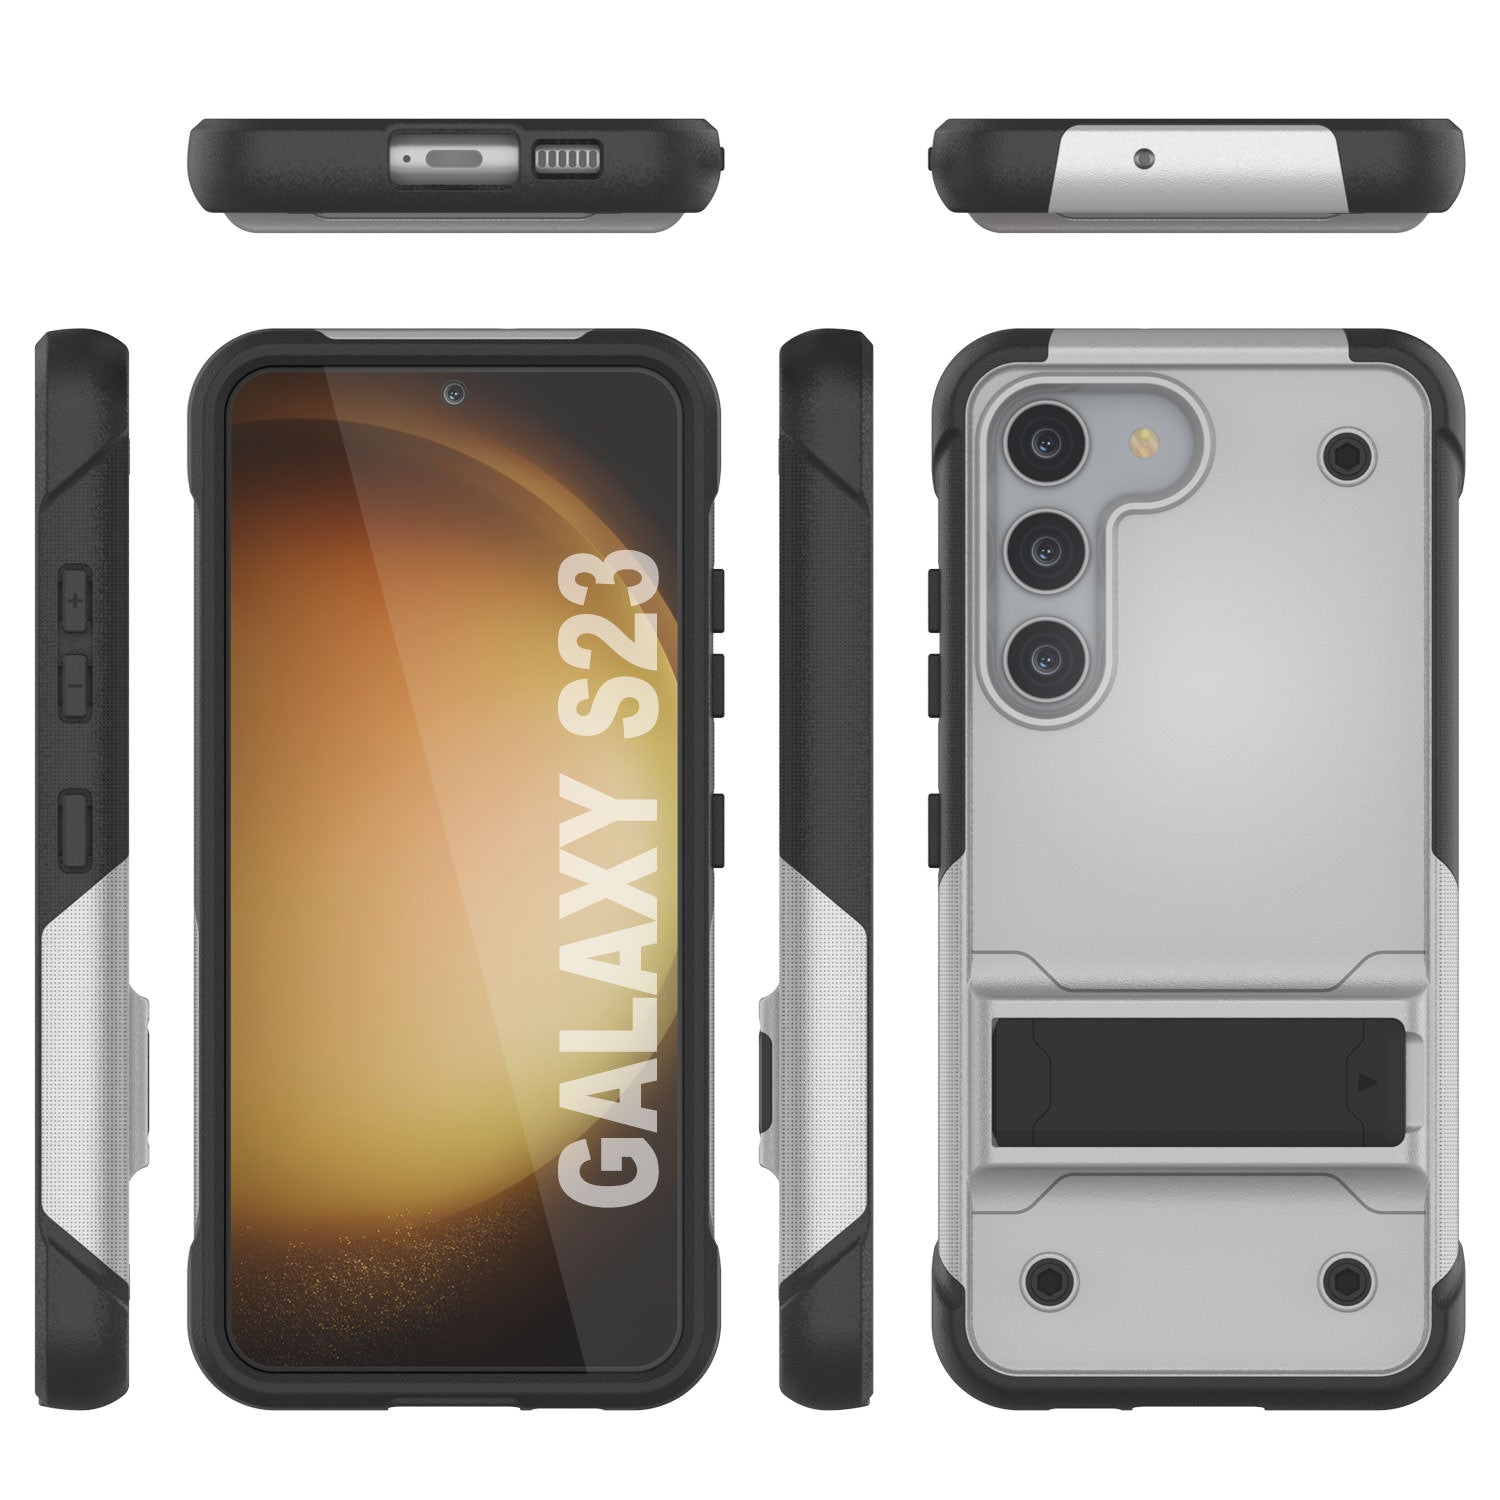 Punkcase Galaxy S23 Case [Reliance Series] Protective Hybrid Military Grade Cover W/Built-in Kickstand [White-Black]